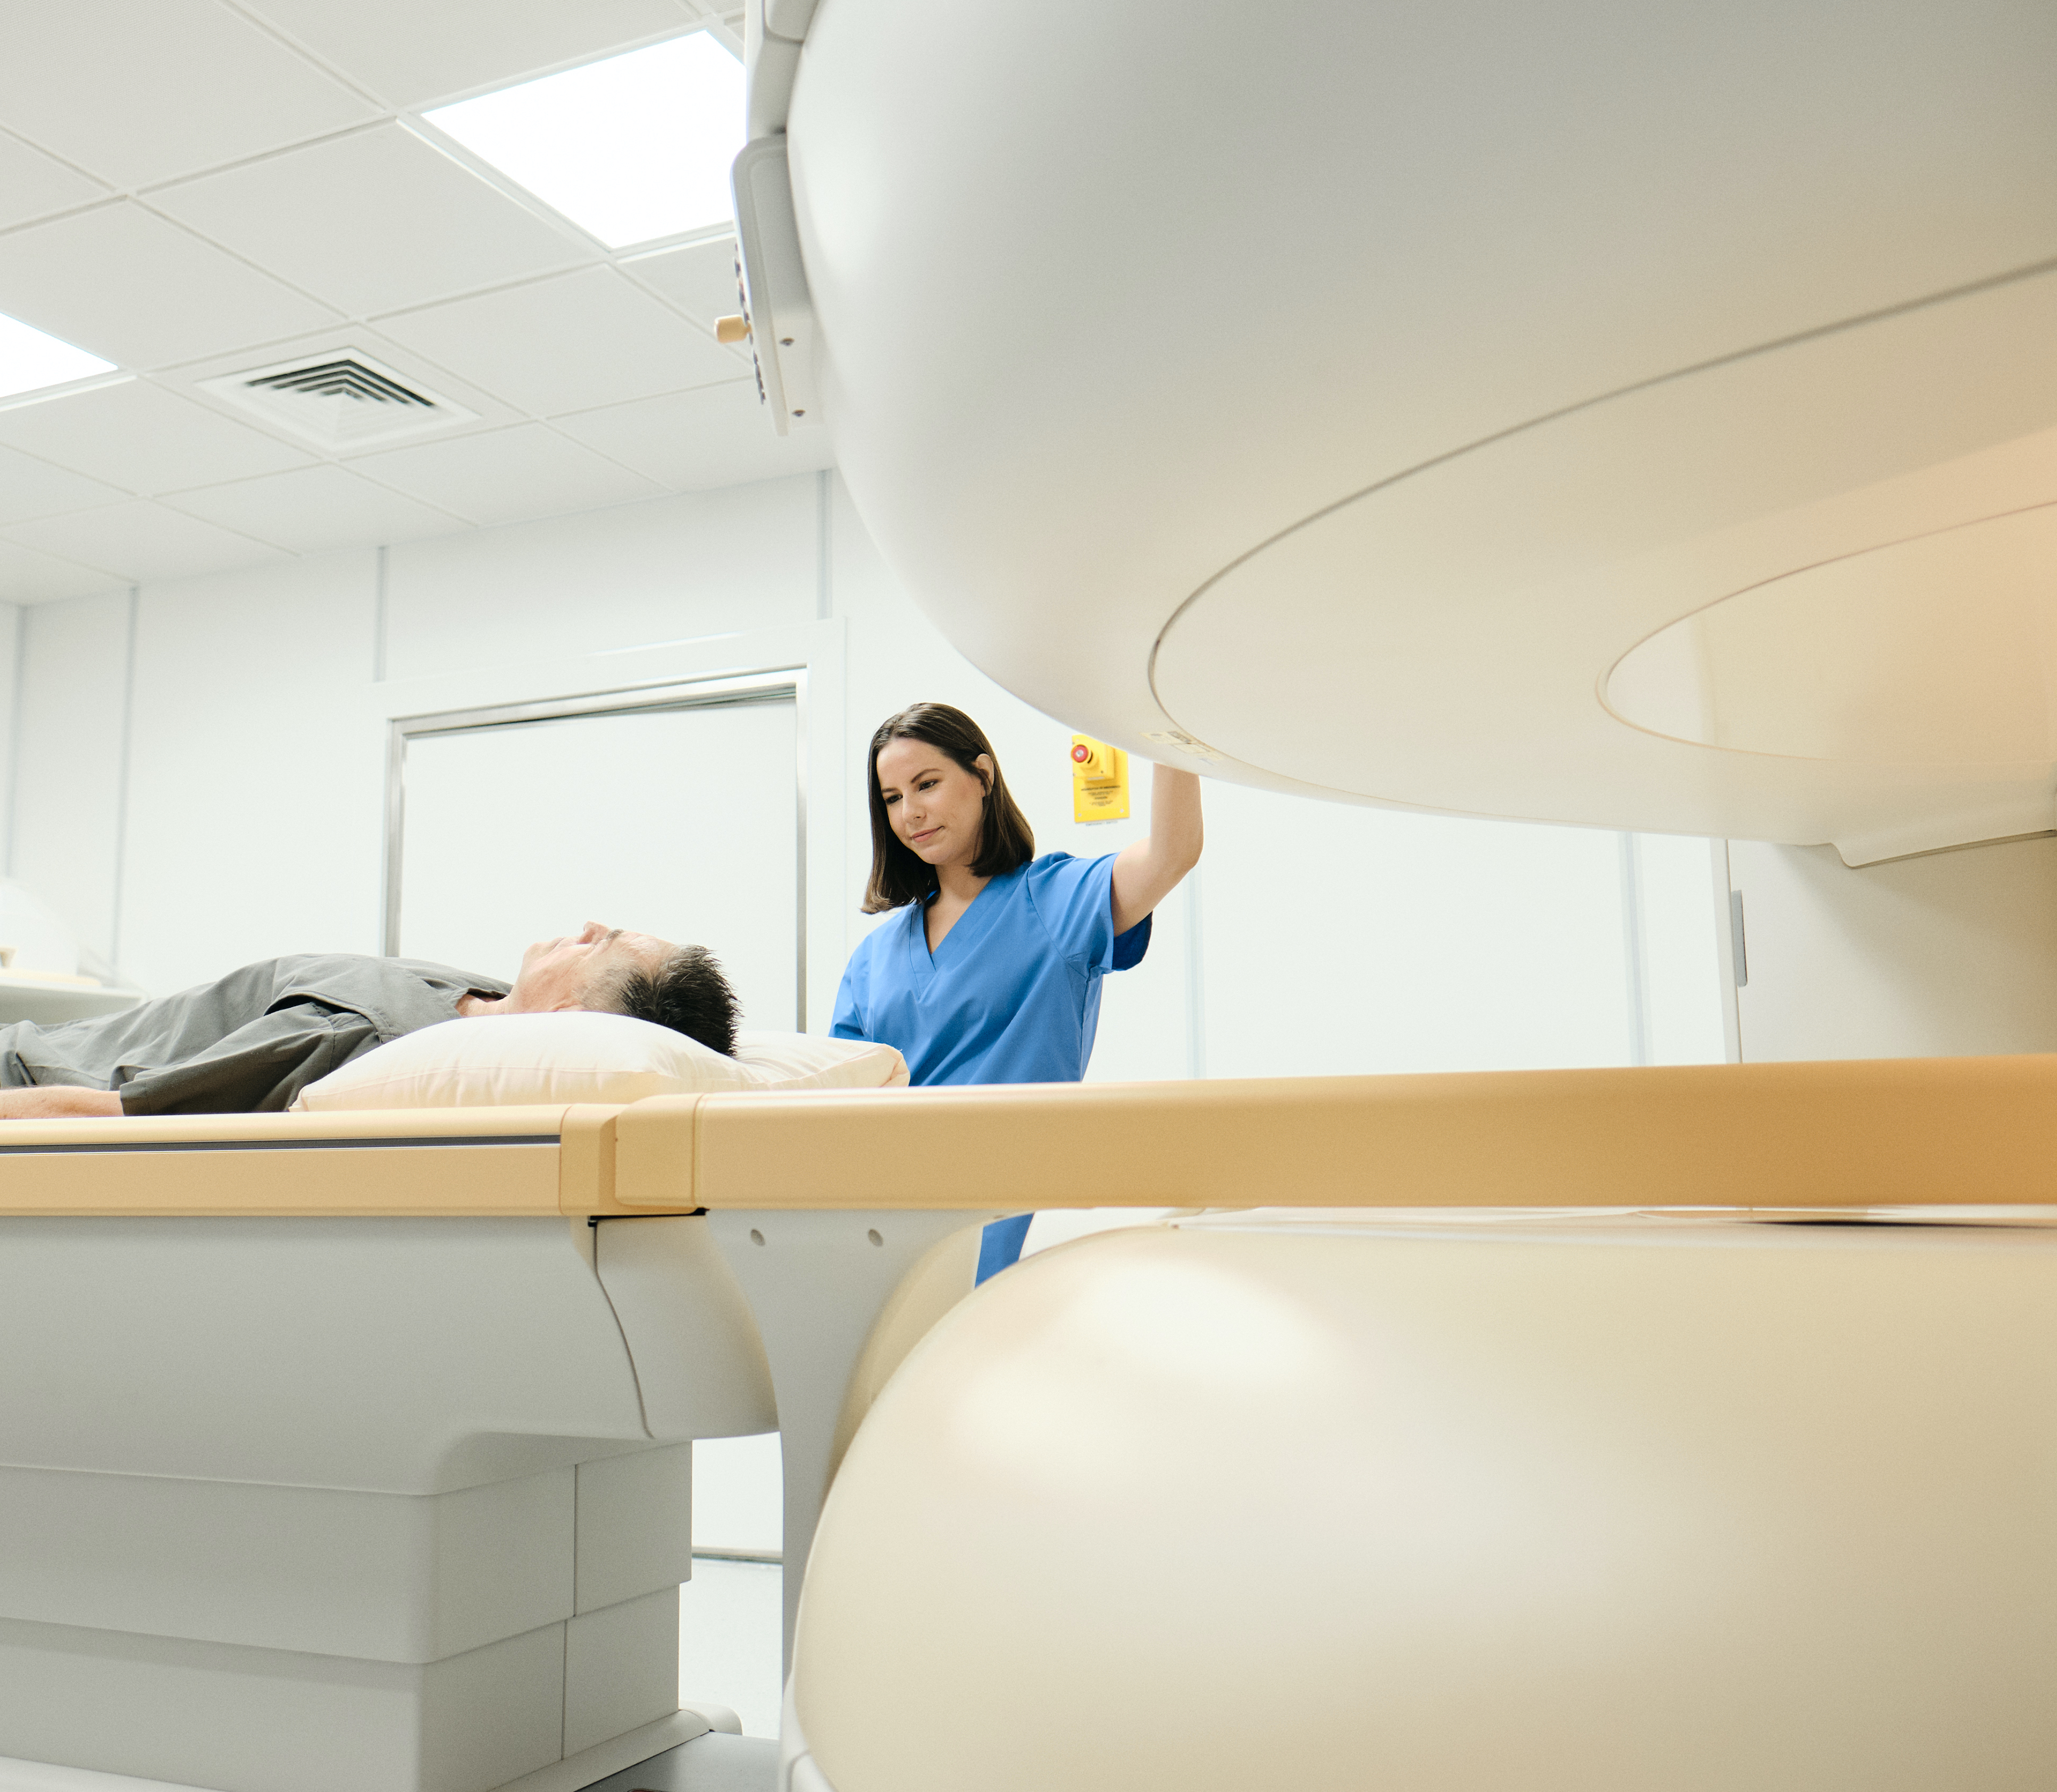 A middle aged patient is entering the MRI scanner. The patient is wearing grey, he is looking at the ceiling. The nurse is wearing blue scrubs, she has lovely brown hair and a friendly smile.